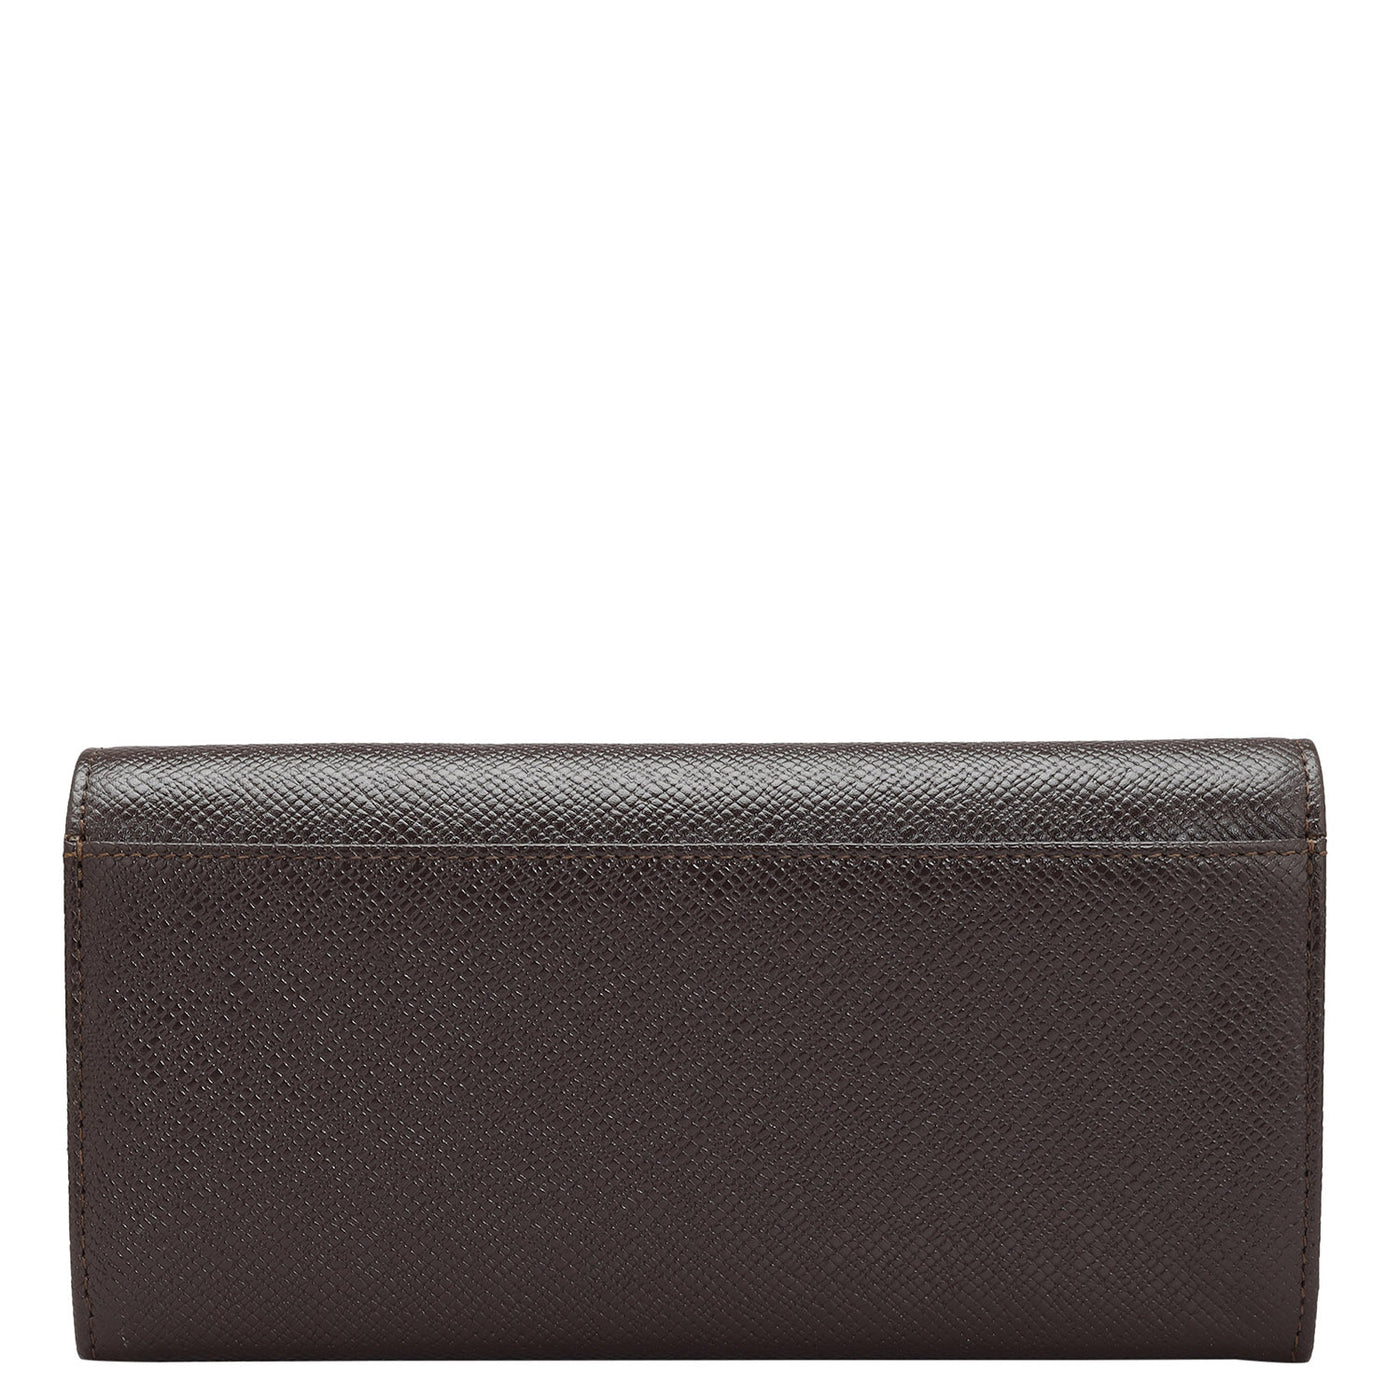 Franzy Leather Ladies Wallet - Chocolate